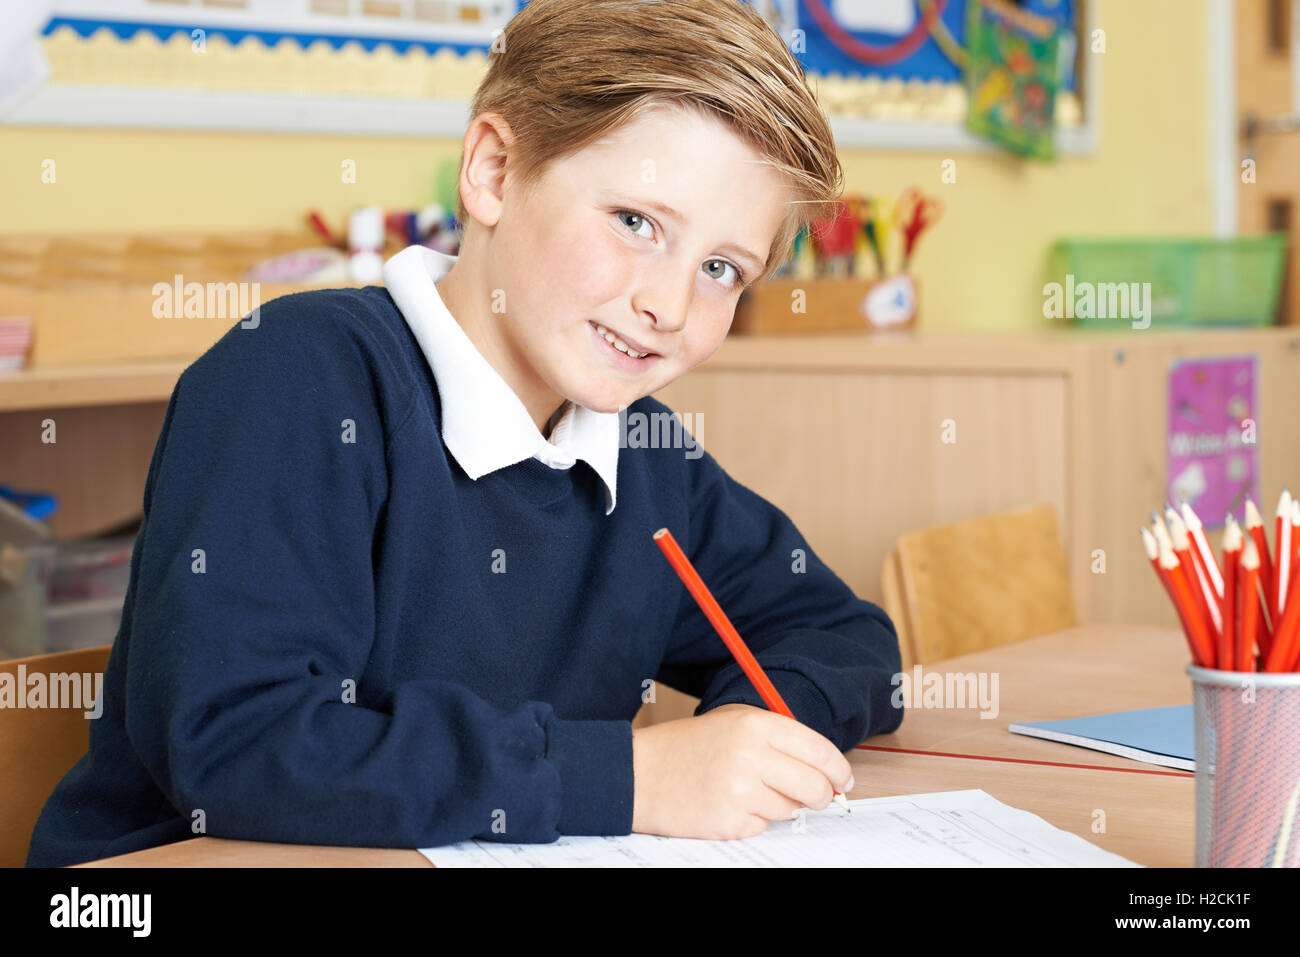 Male Elementary School Pupil Working At Desk Stock Photo